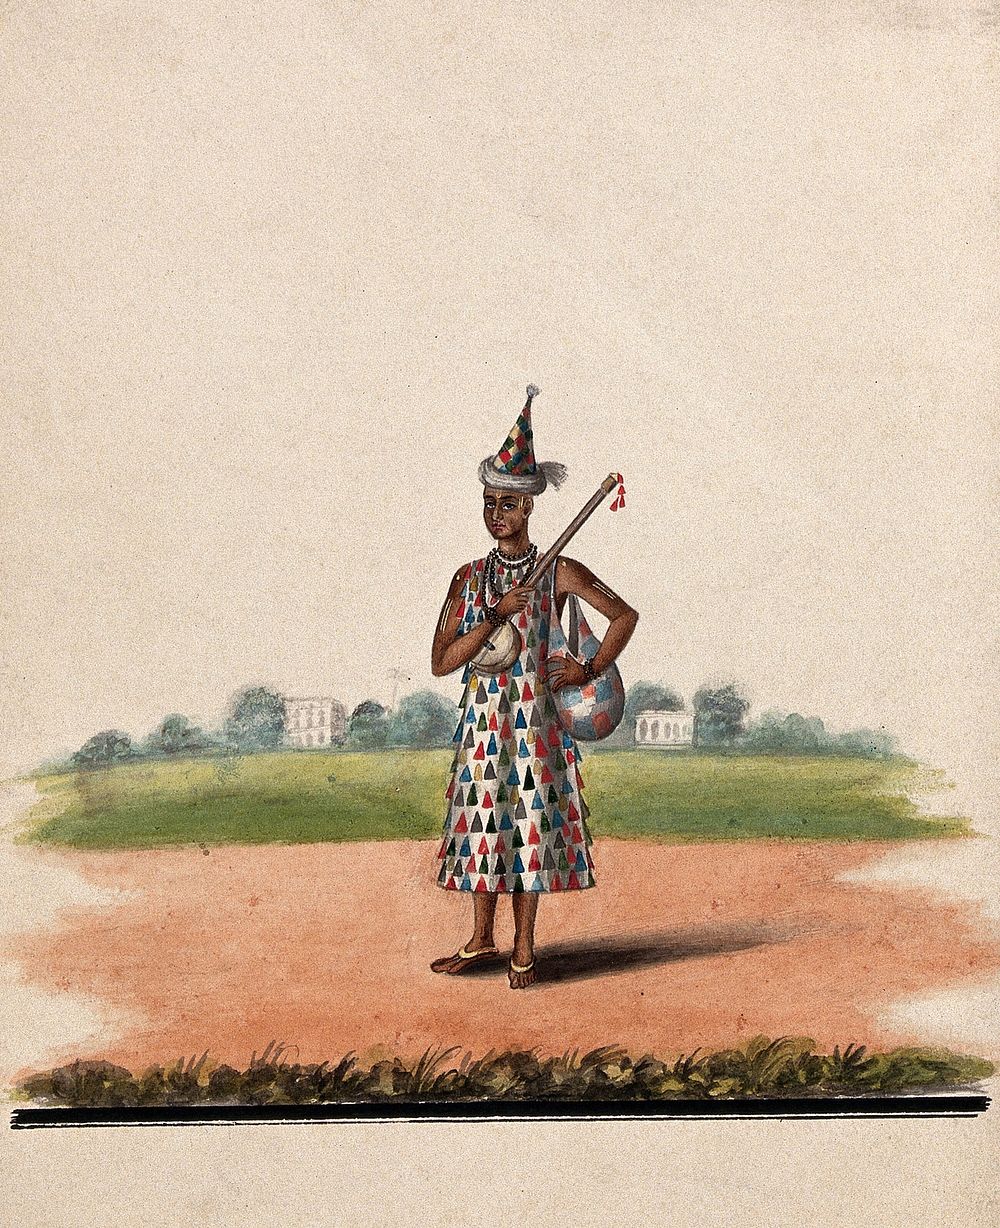 A street performer carrying a musical instrument. Watercolour by an Indian artist.